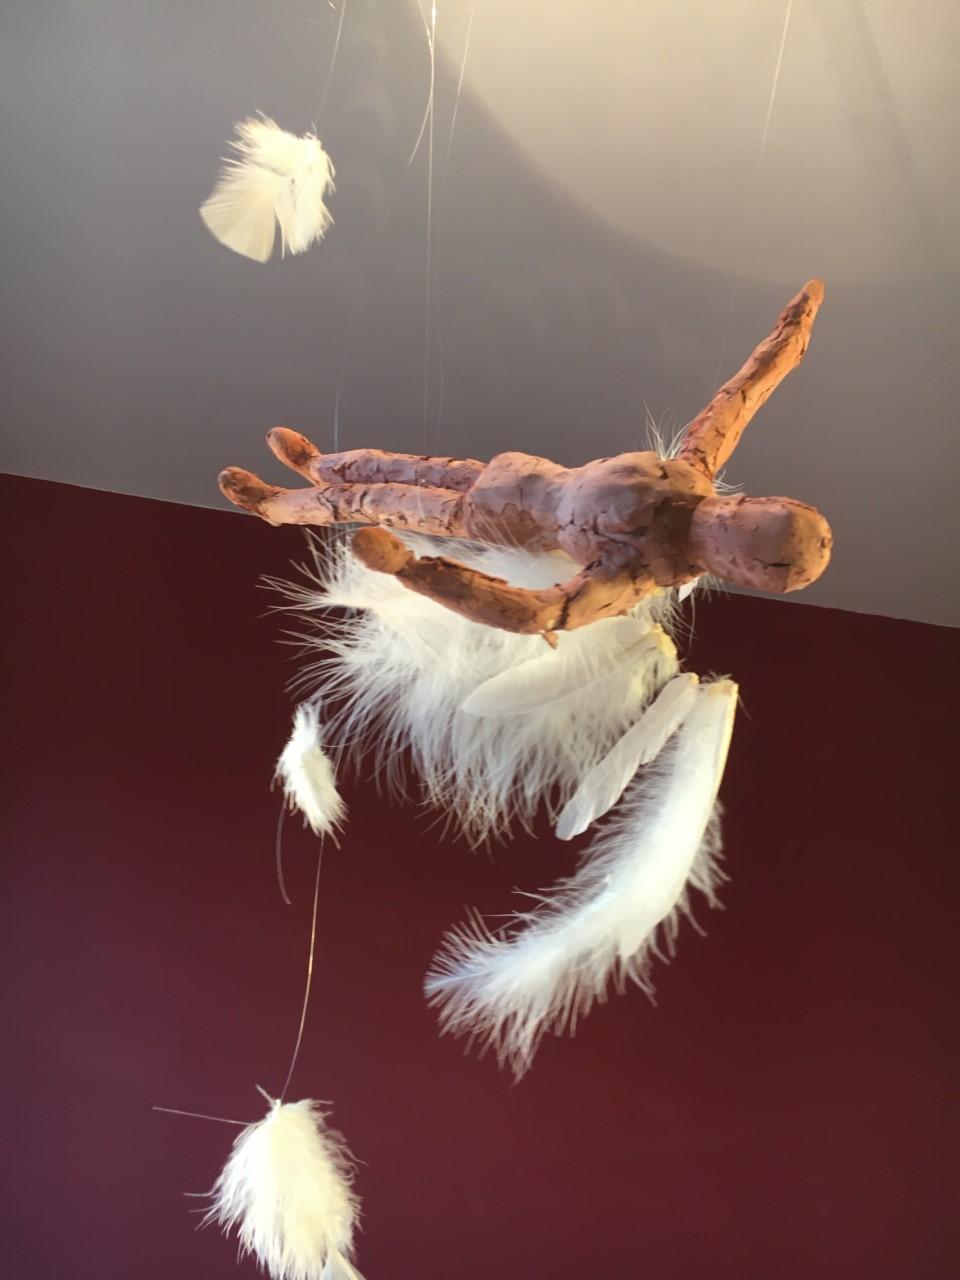 A suspended sculpture of Icarus with the feathers of his wings falling off.